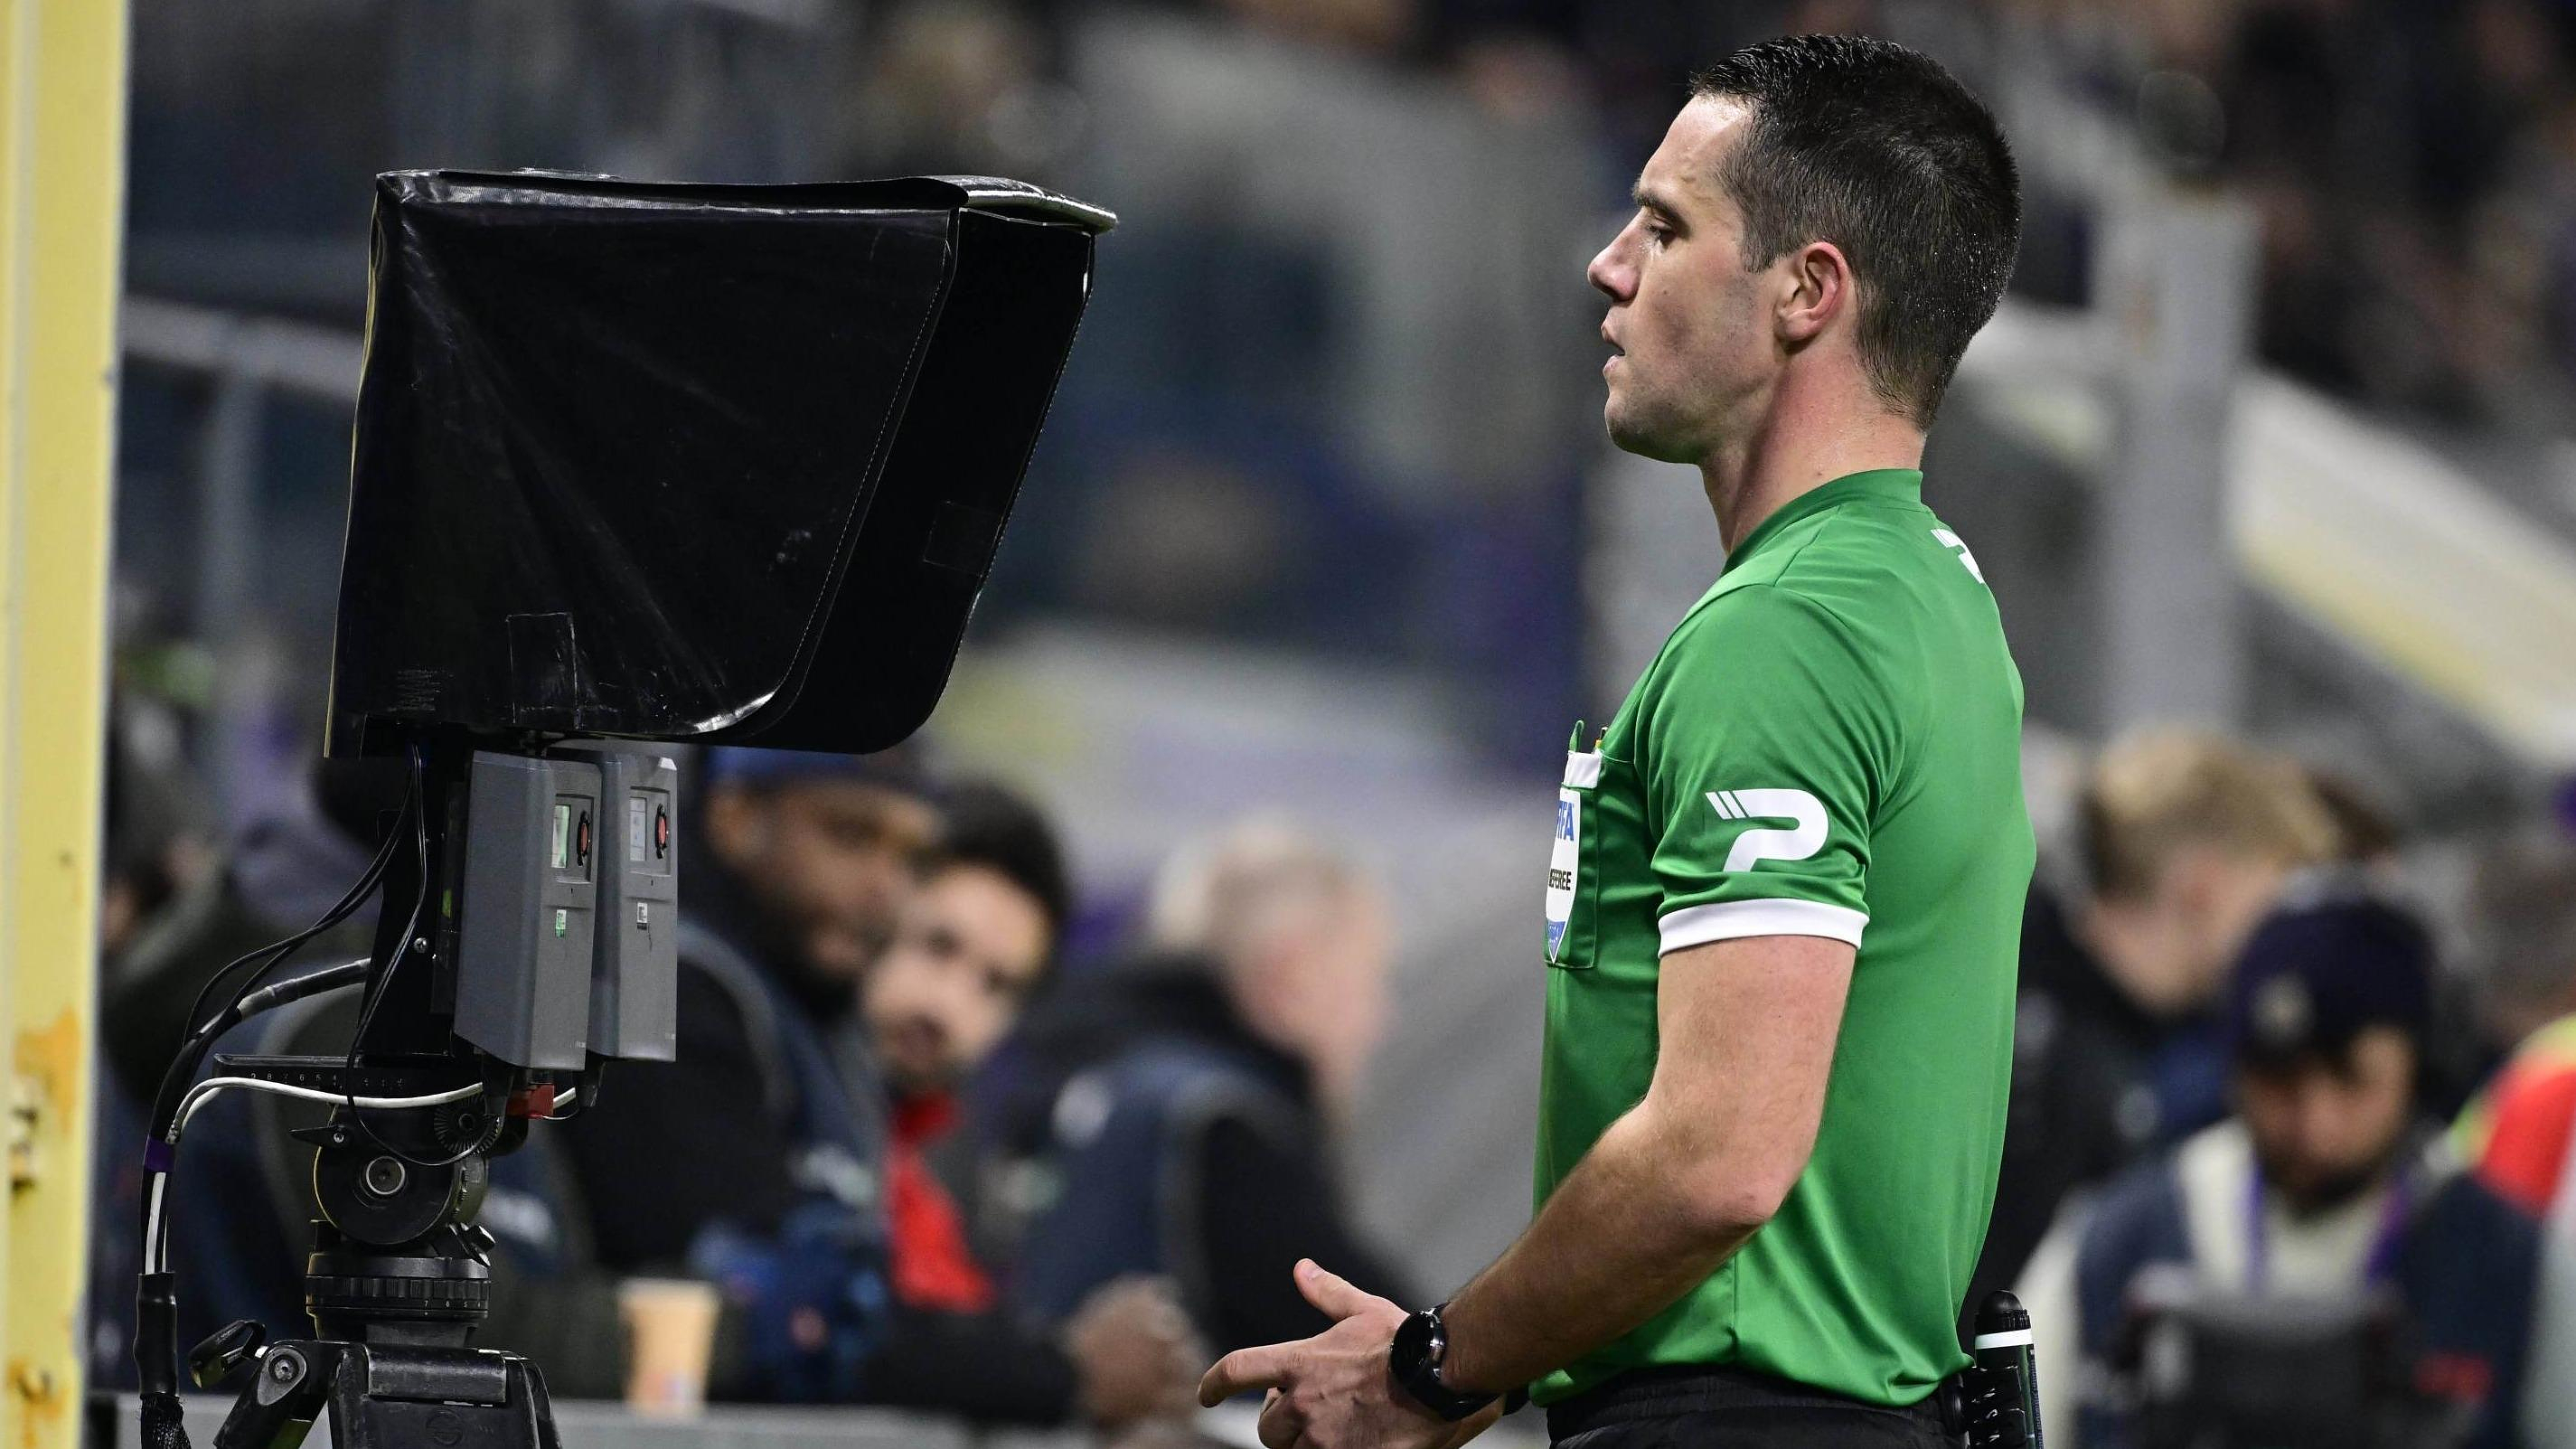 Football: in Türkiye, Var entrusted to foreign referees in “high stakes” matches